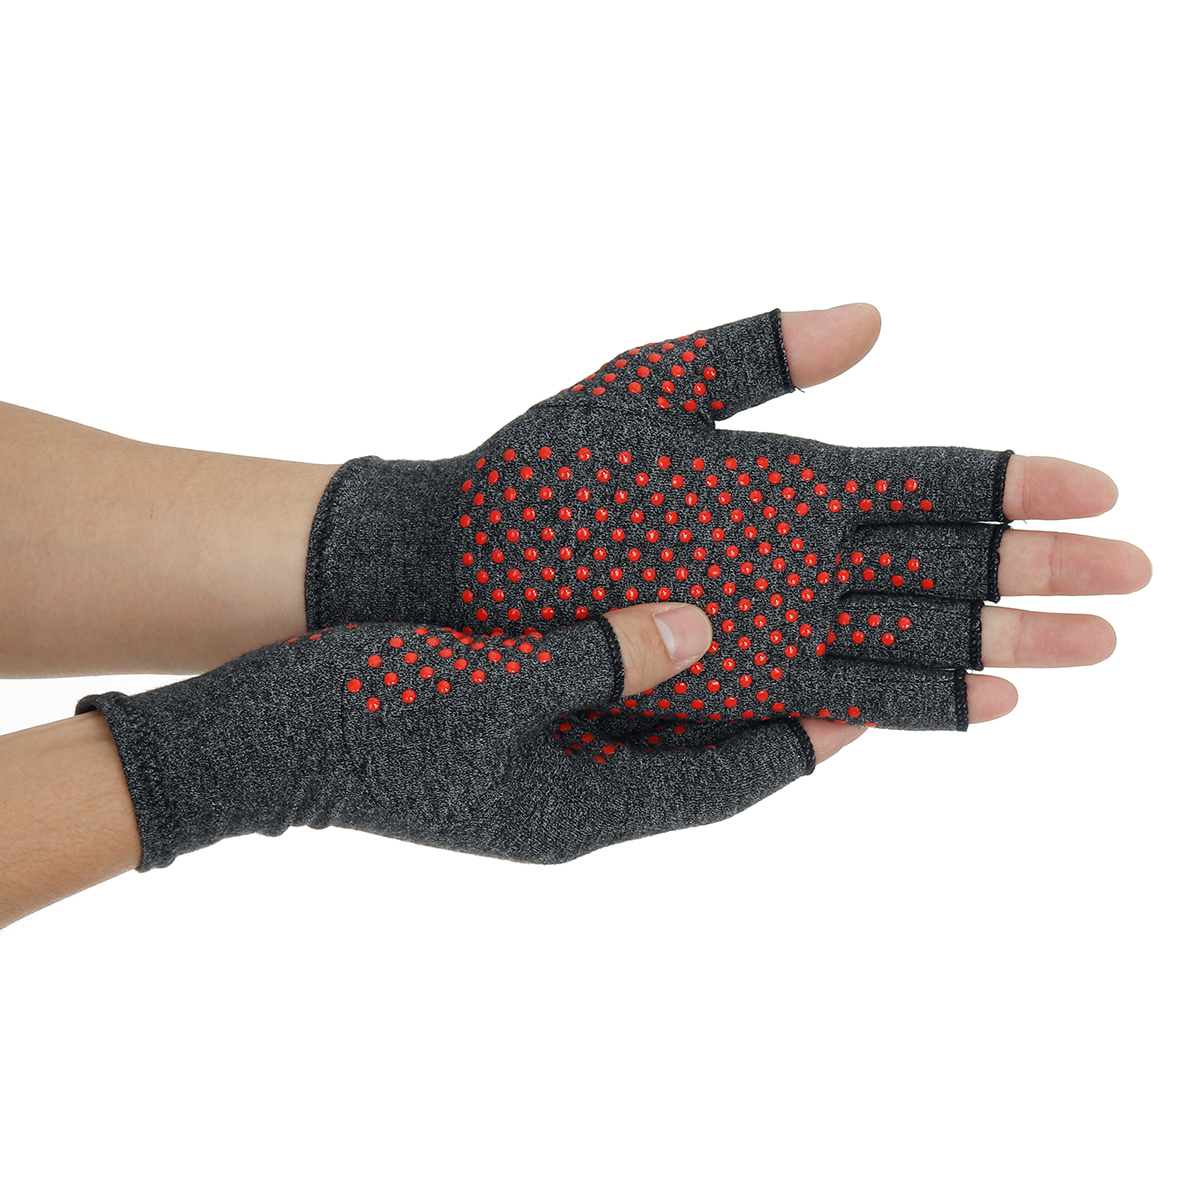 1-Pair-Compression-Arthritis-Gloves-Arthritic-Joint-Pain-Relief-Hand-Gloves-Therapy-Open-Fingers-Com-1777634-3